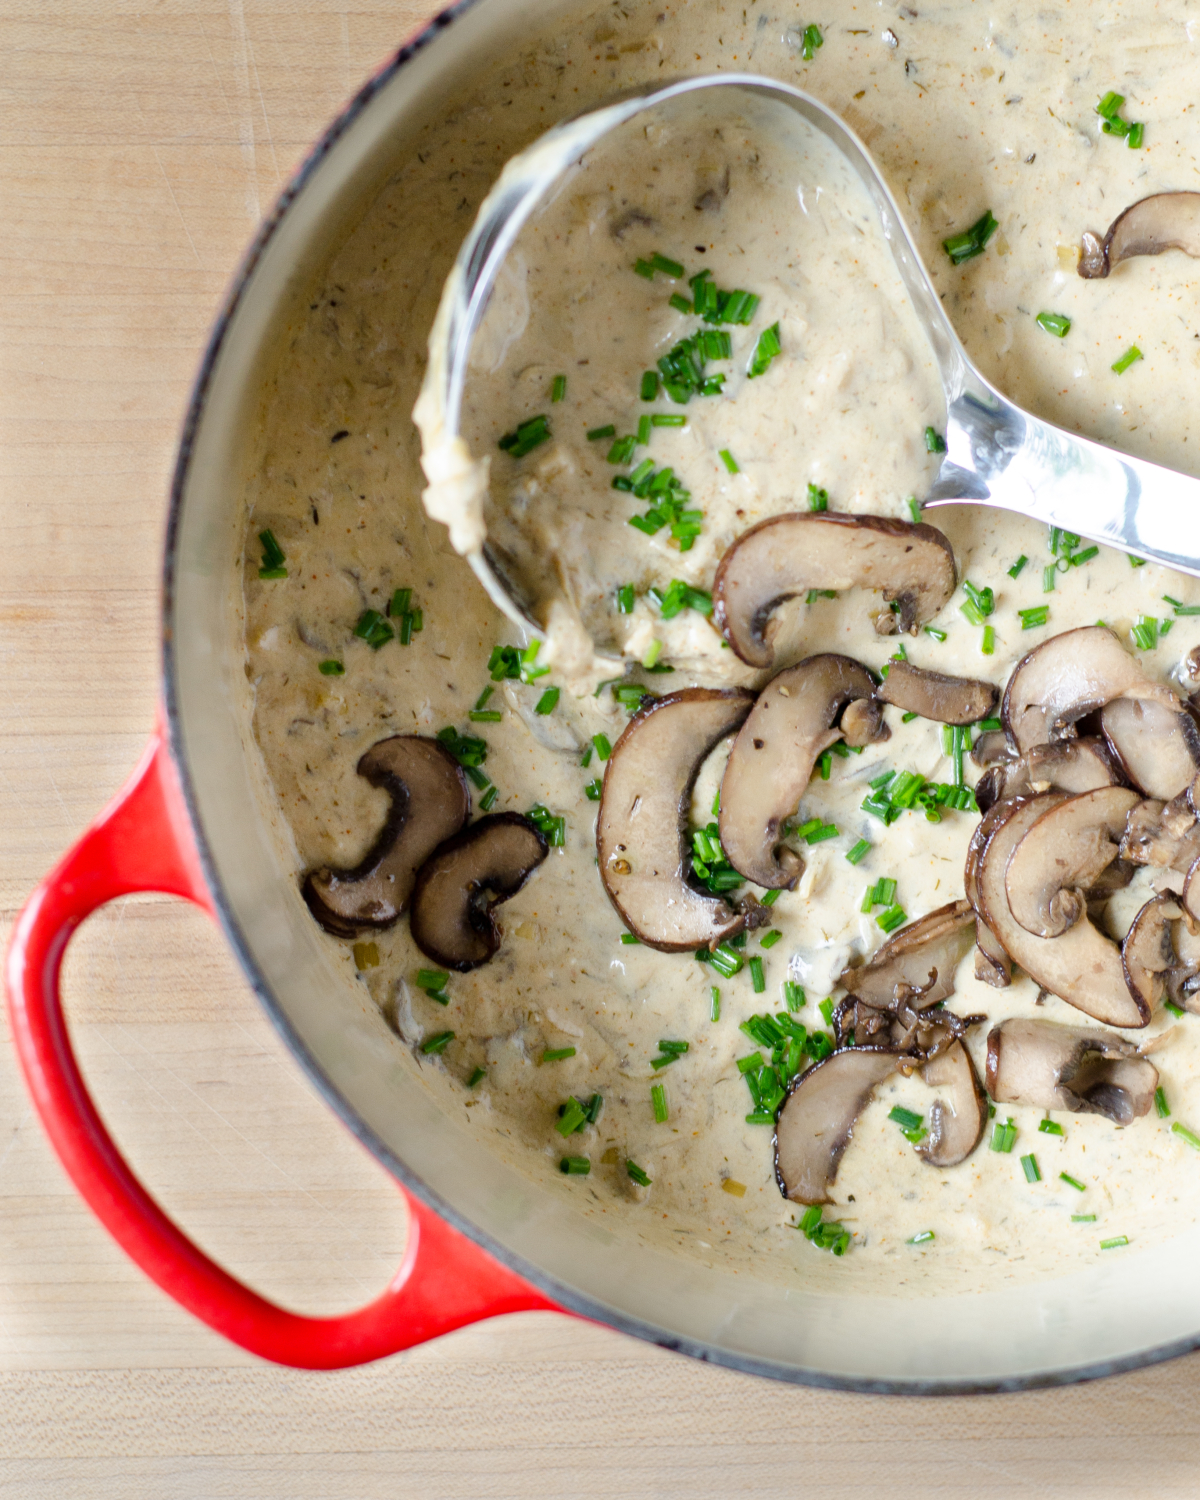 An easy recipe for light creamy mushroom soup (inspired by Hungarian mushroom soup) with an easy trick for luxurious creaminess with much fewer calories. So utterly delicious you'll never know you're eating light!